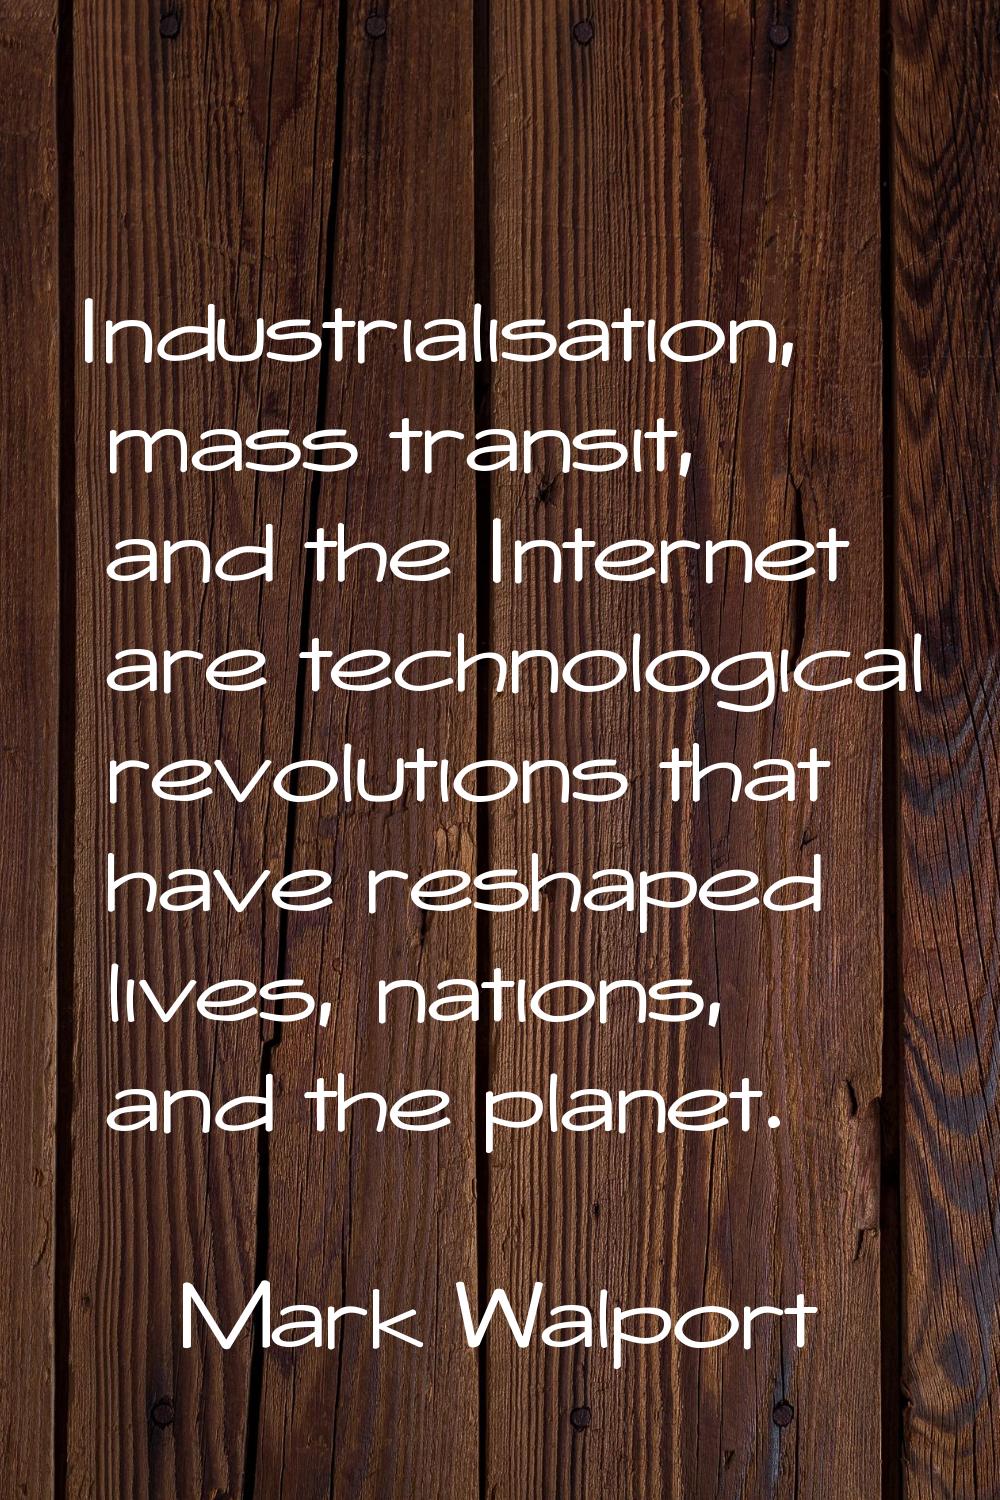 Industrialisation, mass transit, and the Internet are technological revolutions that have reshaped 